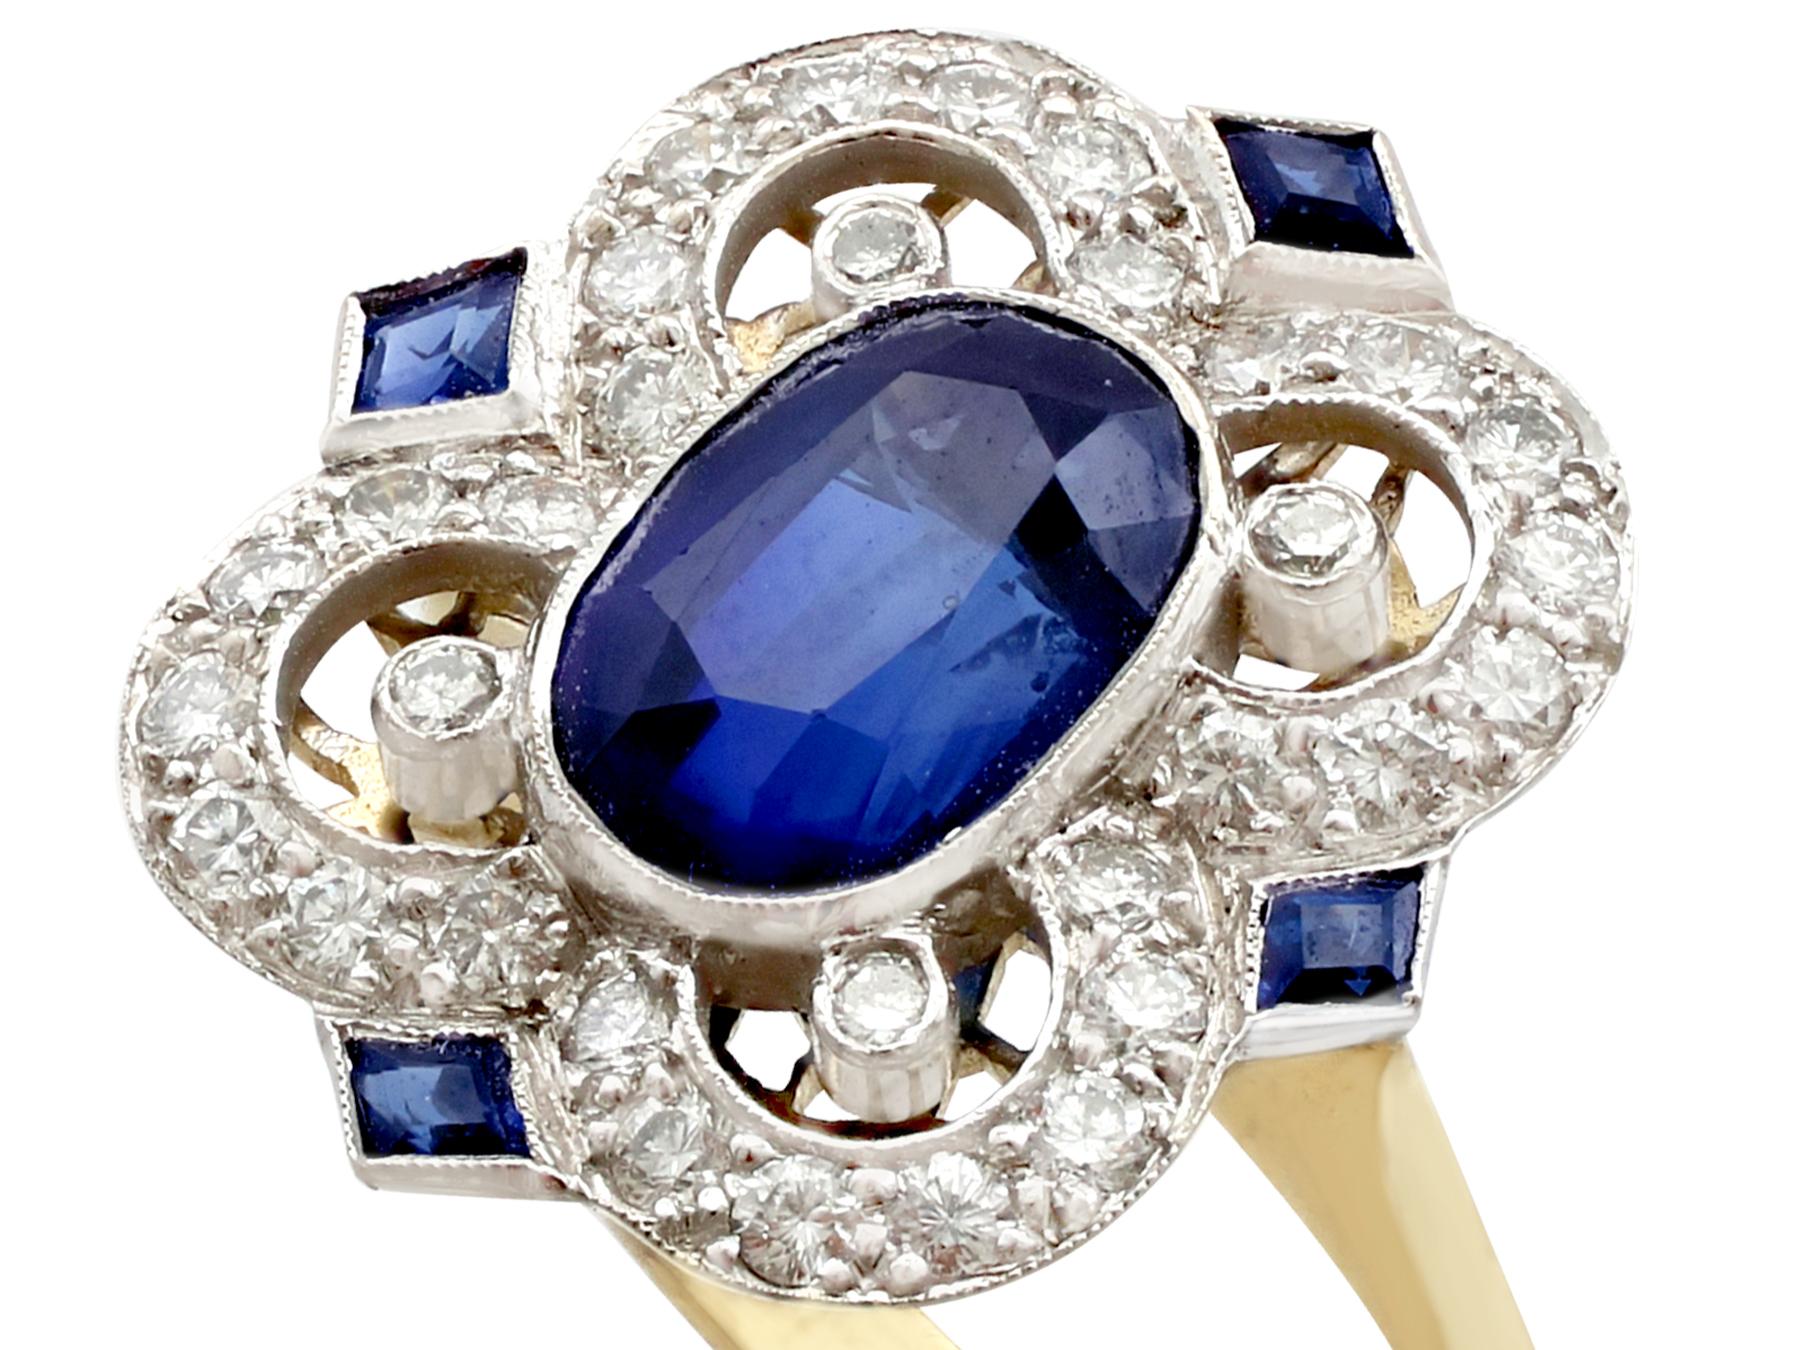 A fine and impressive 3.20 carat sapphire and 0.96 carat diamond, platinum set cocktail ring in 18k yellow gold; part of our jewelry and estate jewelry collections

This fine sapphire ring has been crafted in 18k yellow gold with a platinum